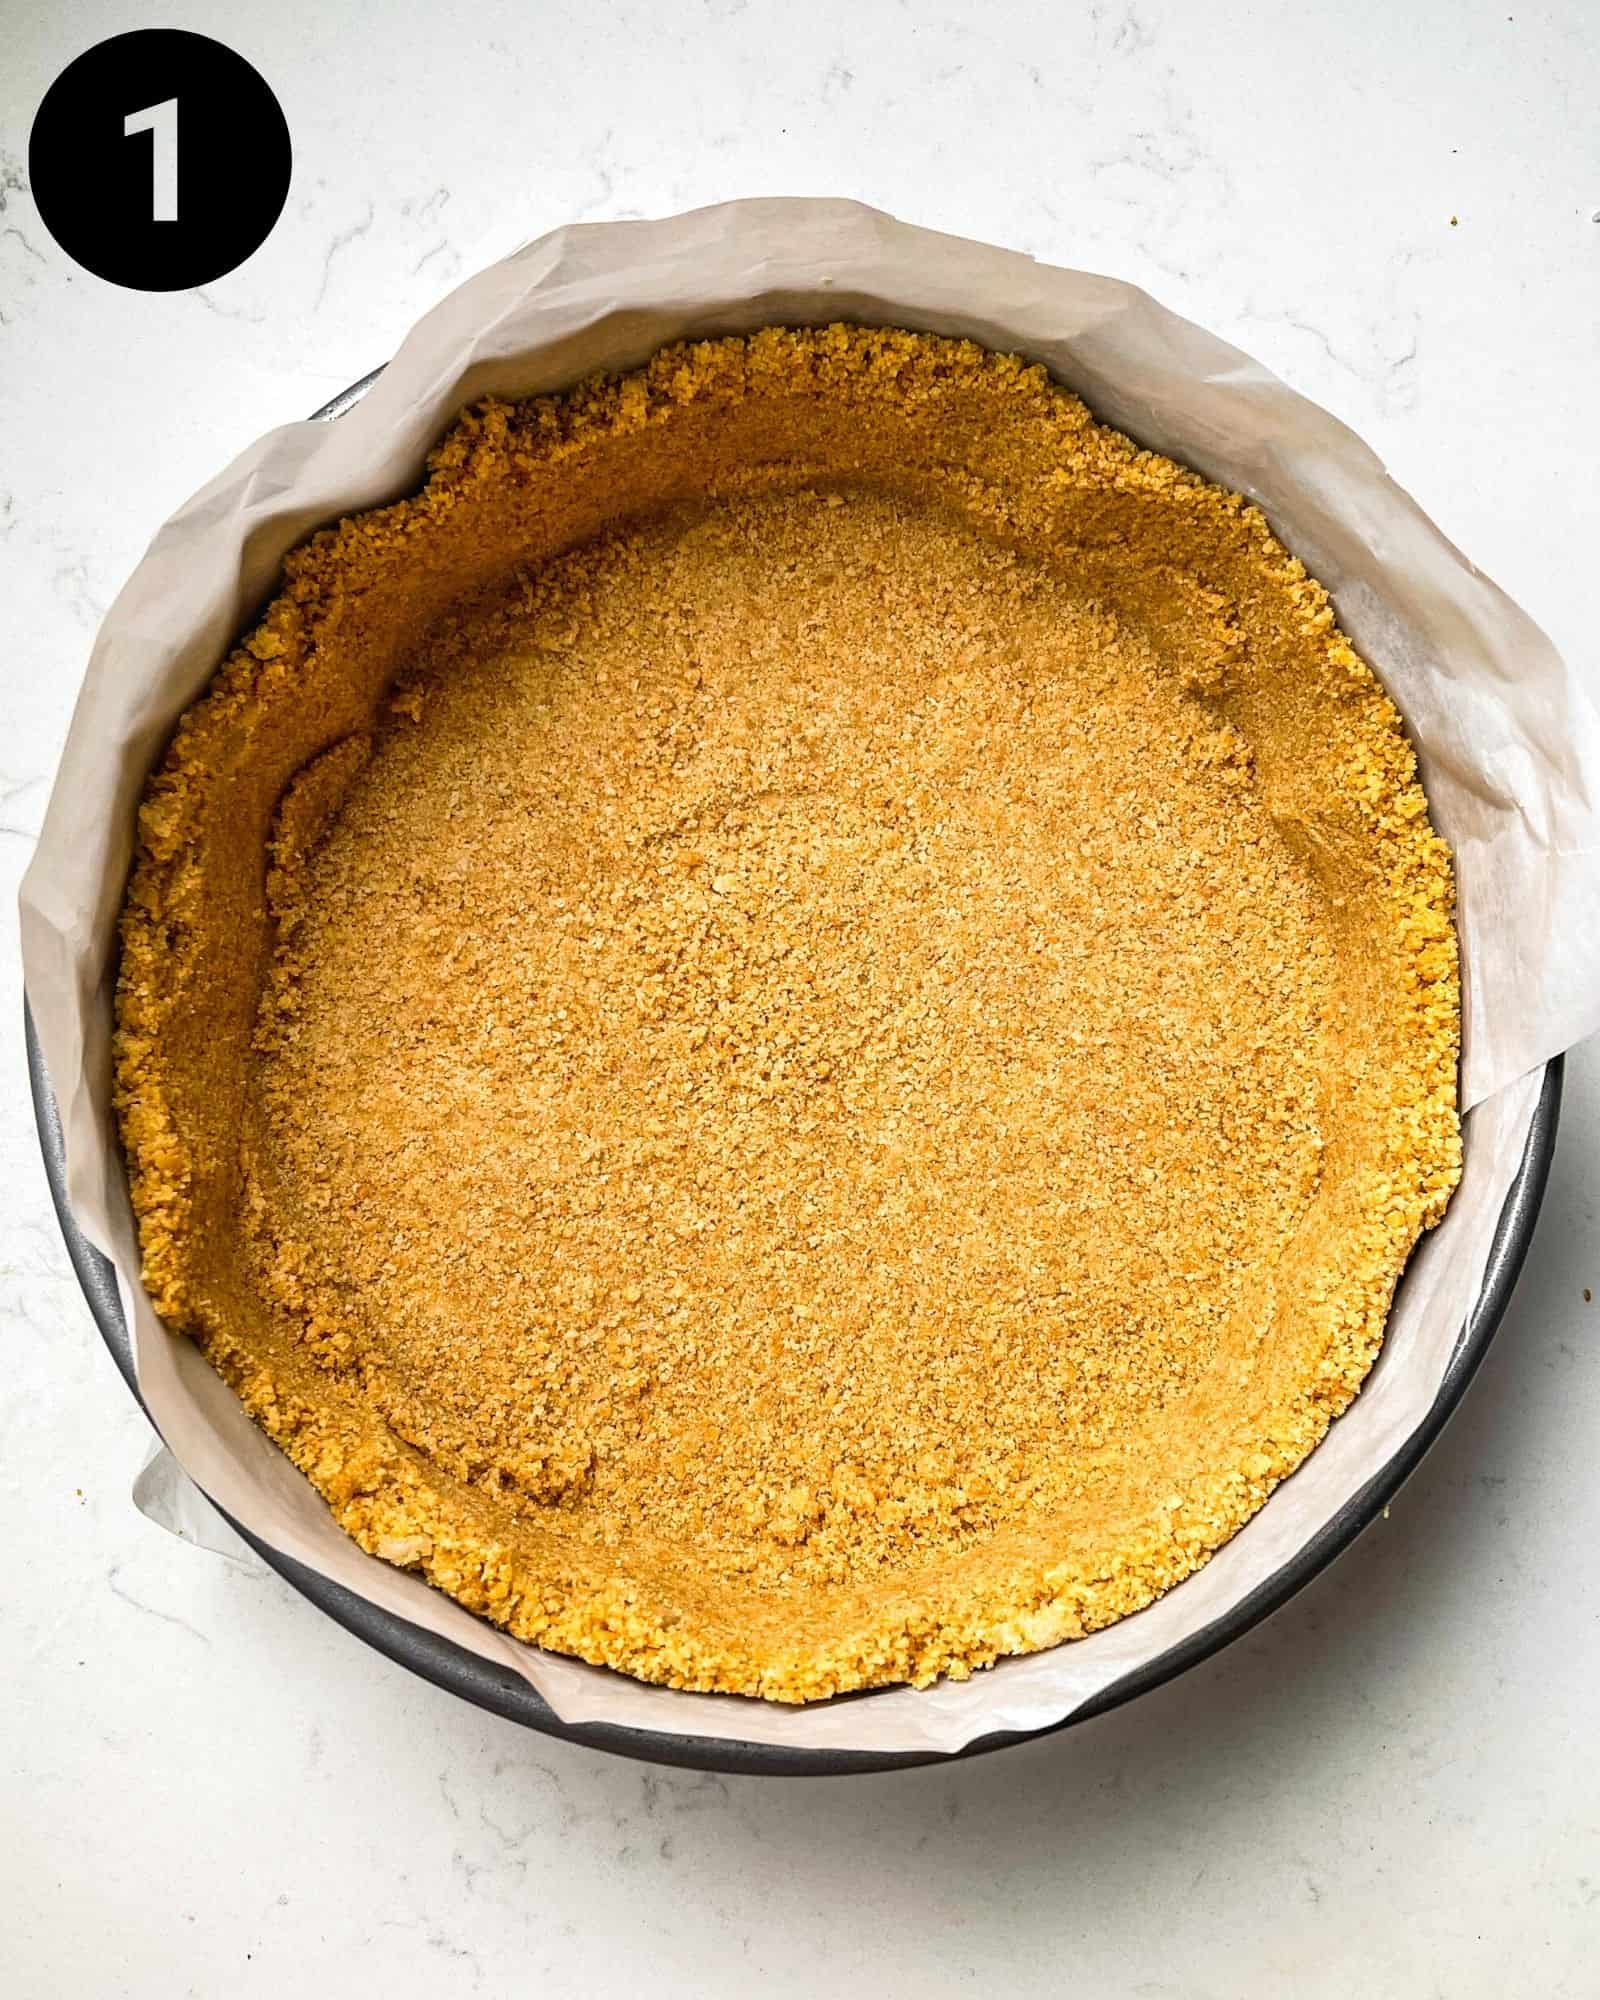 graham cracker crust in a springform pan lined with parchment paper.